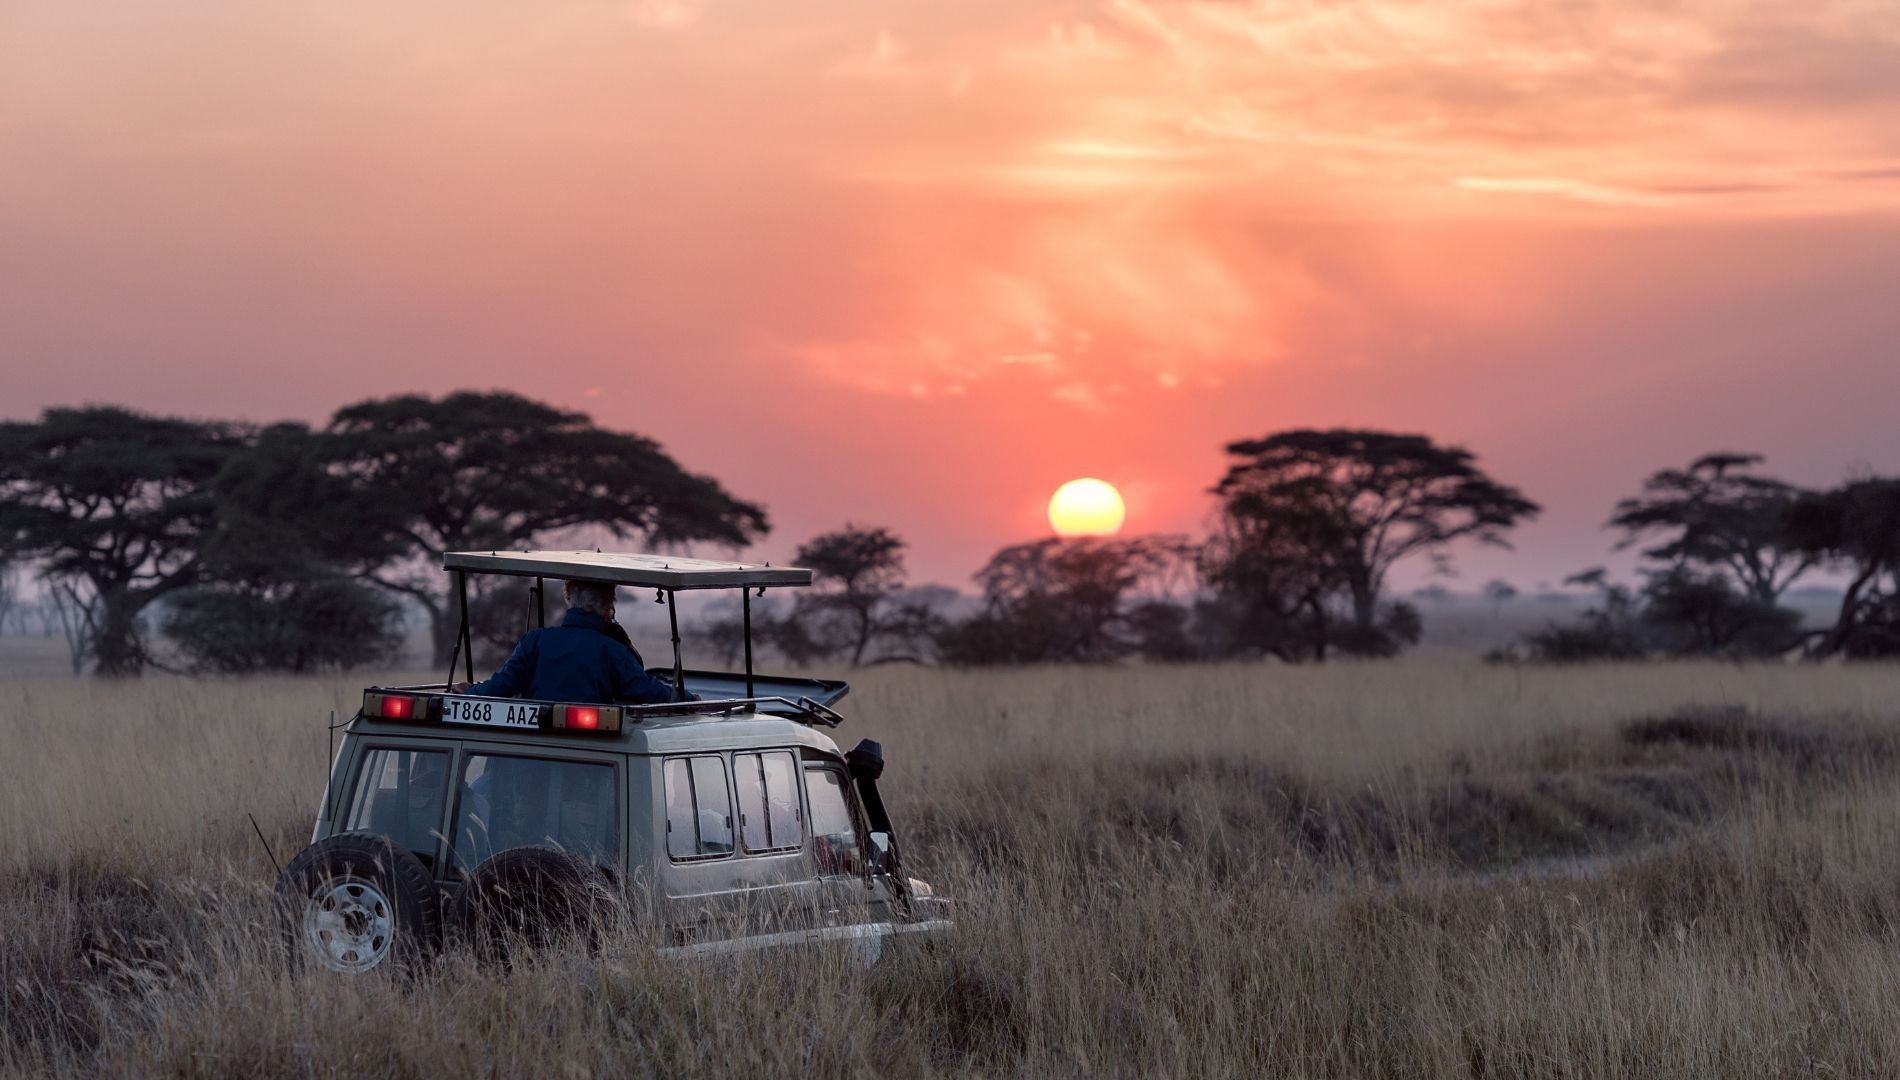 Most romantic places in the world: Tanzania